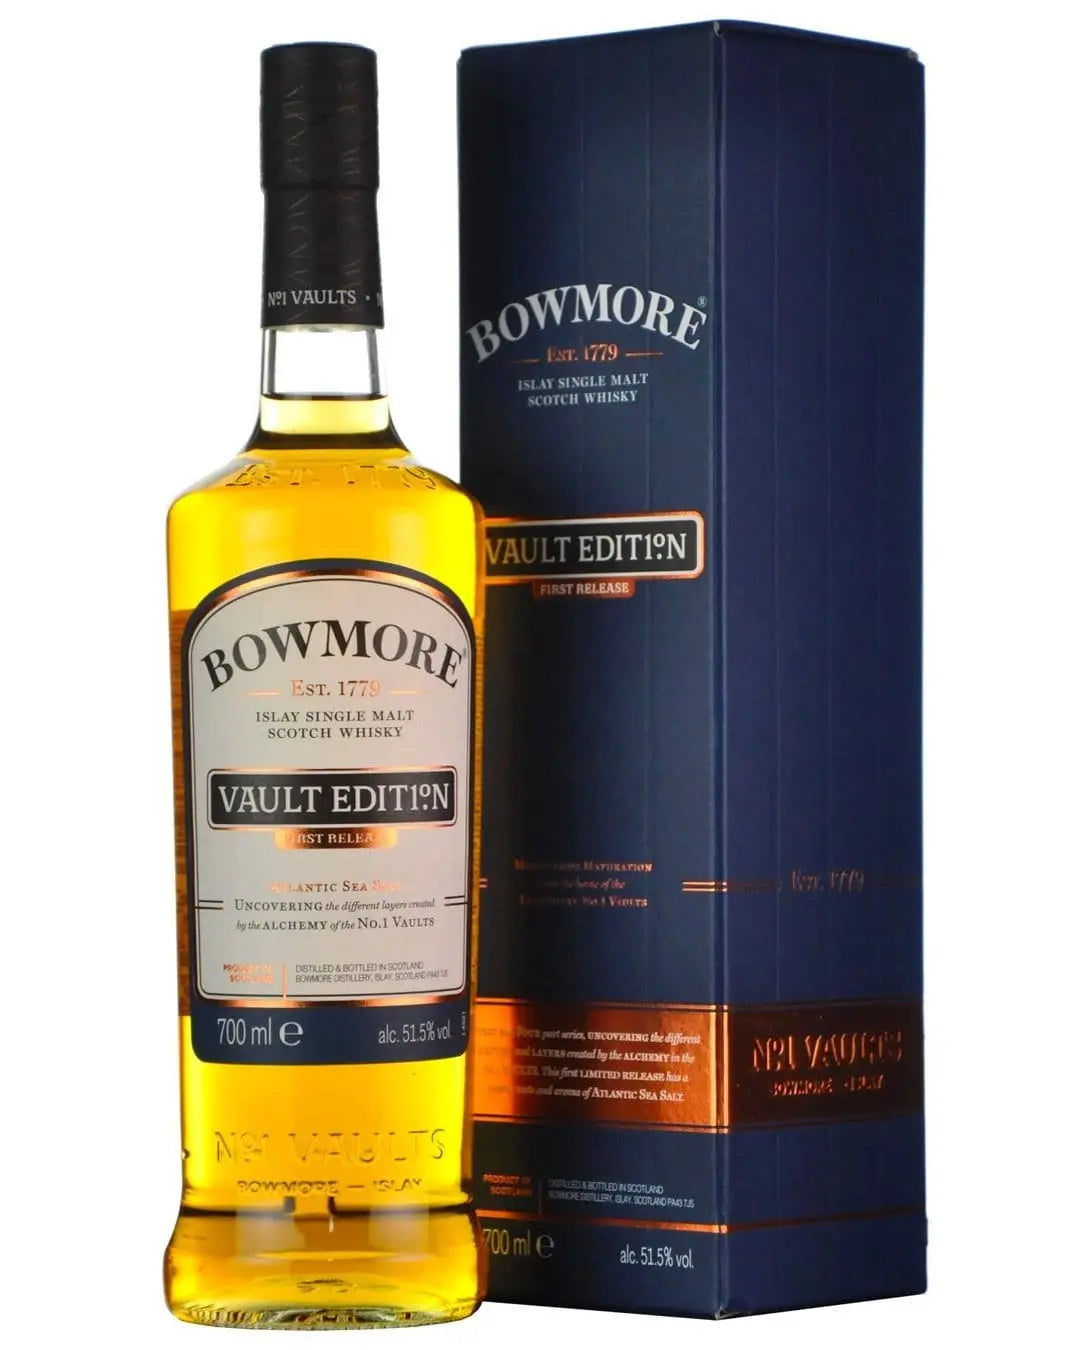 Bowmore Vault Edition First Release "Atlantic Sea Salt", 70 cl Whisky 5010496004418